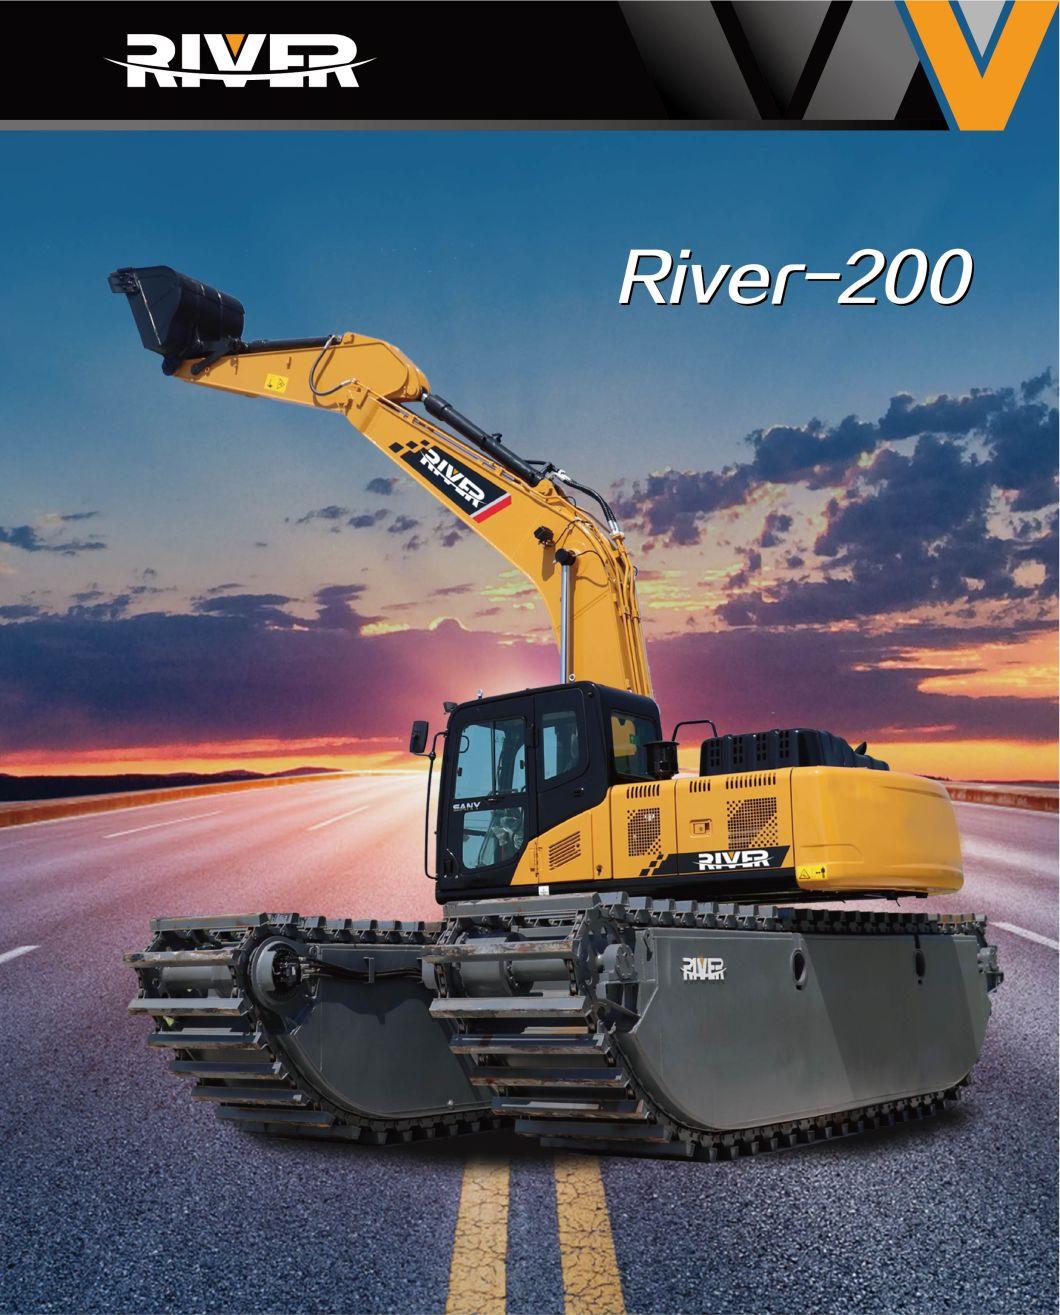 Professional Factory Used Cat 320c Swamp Buggy Amphibious Excavator with New Floating Pontoon Undercarriage